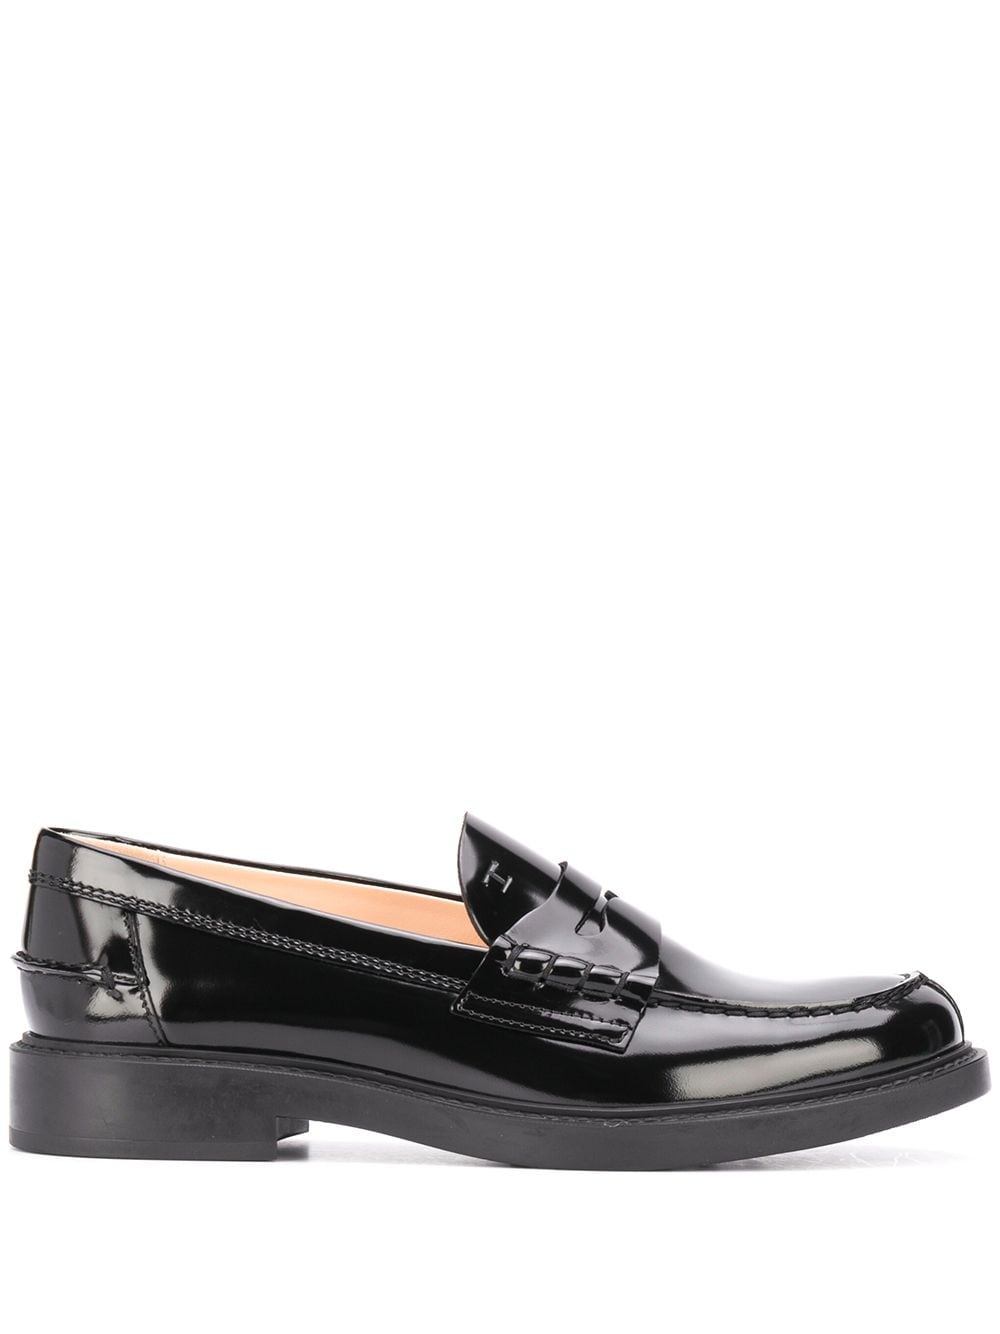 Shop Tod's patent penny loafers with Express Delivery - FARFETCH